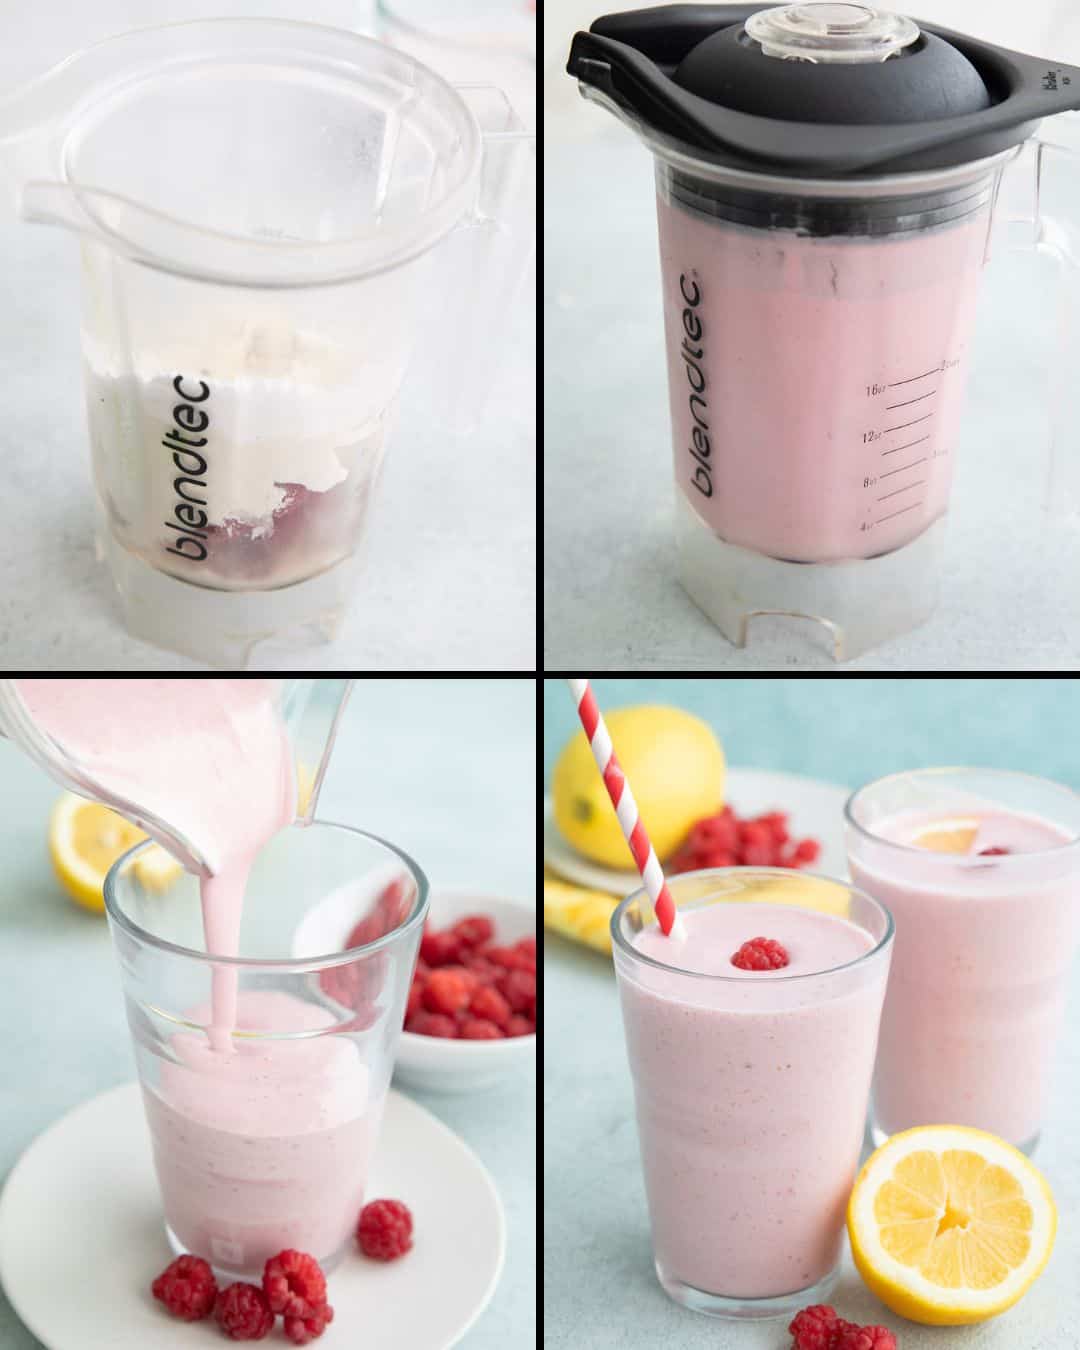 A collage of four images showing how to make a keto raspberry protein shake.